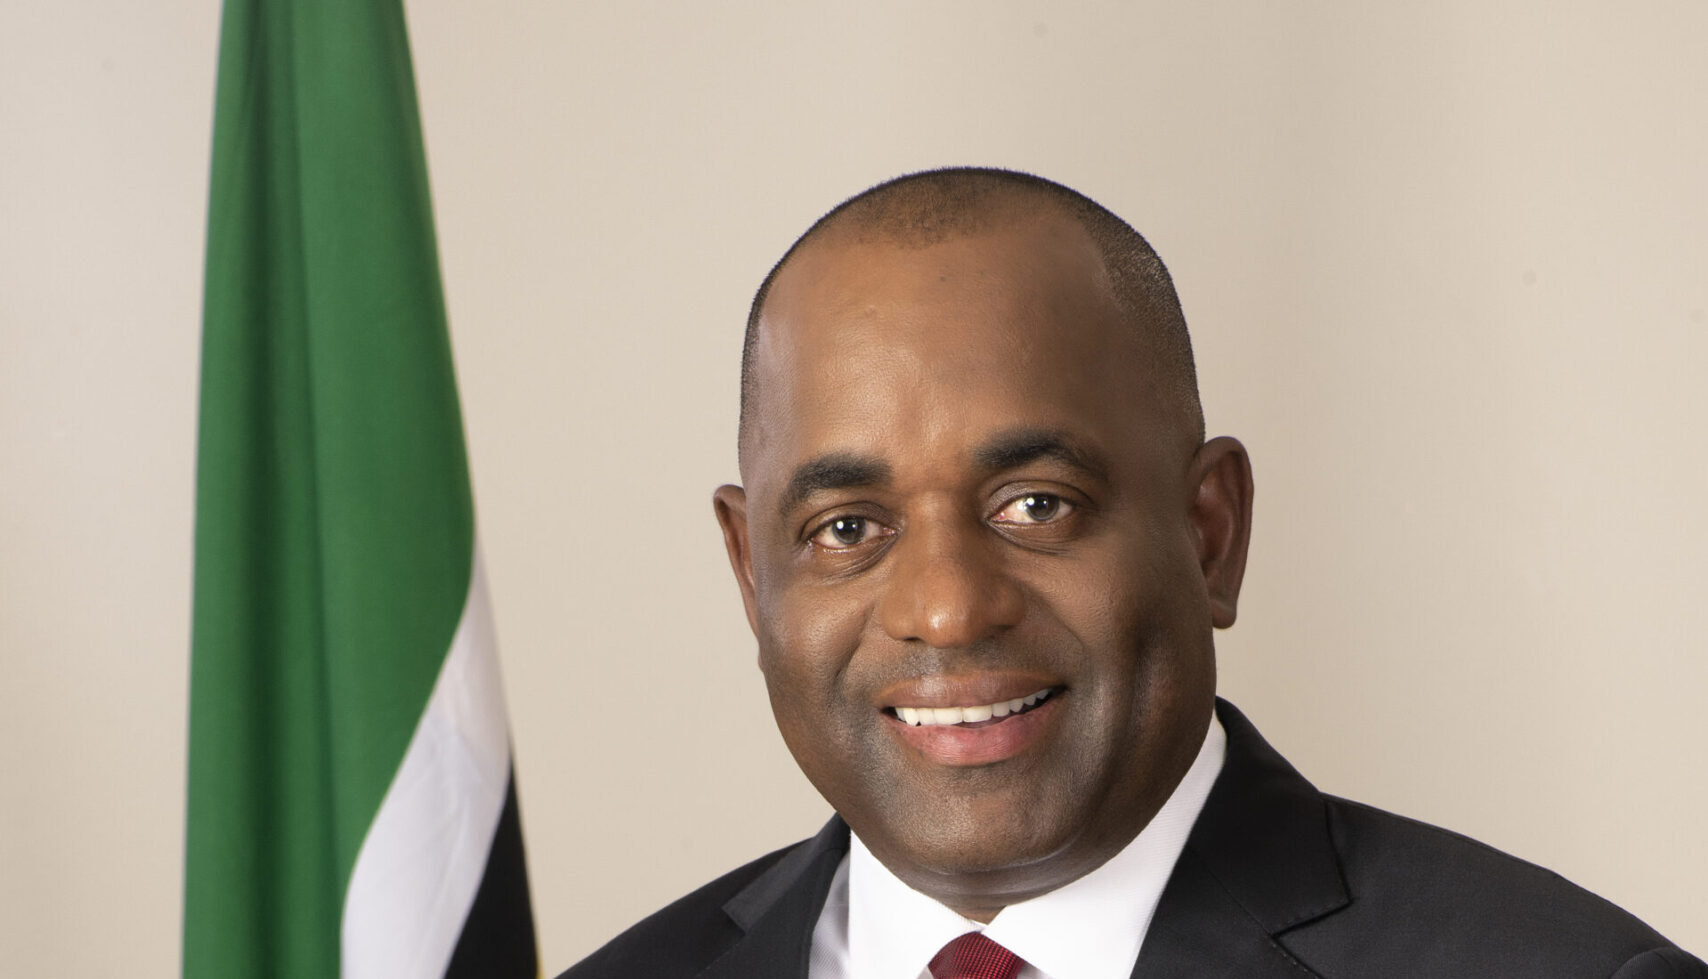 [press Statement] Prime Minister Roosevelt Skerrit To Attend Conference Of Heads Of Government